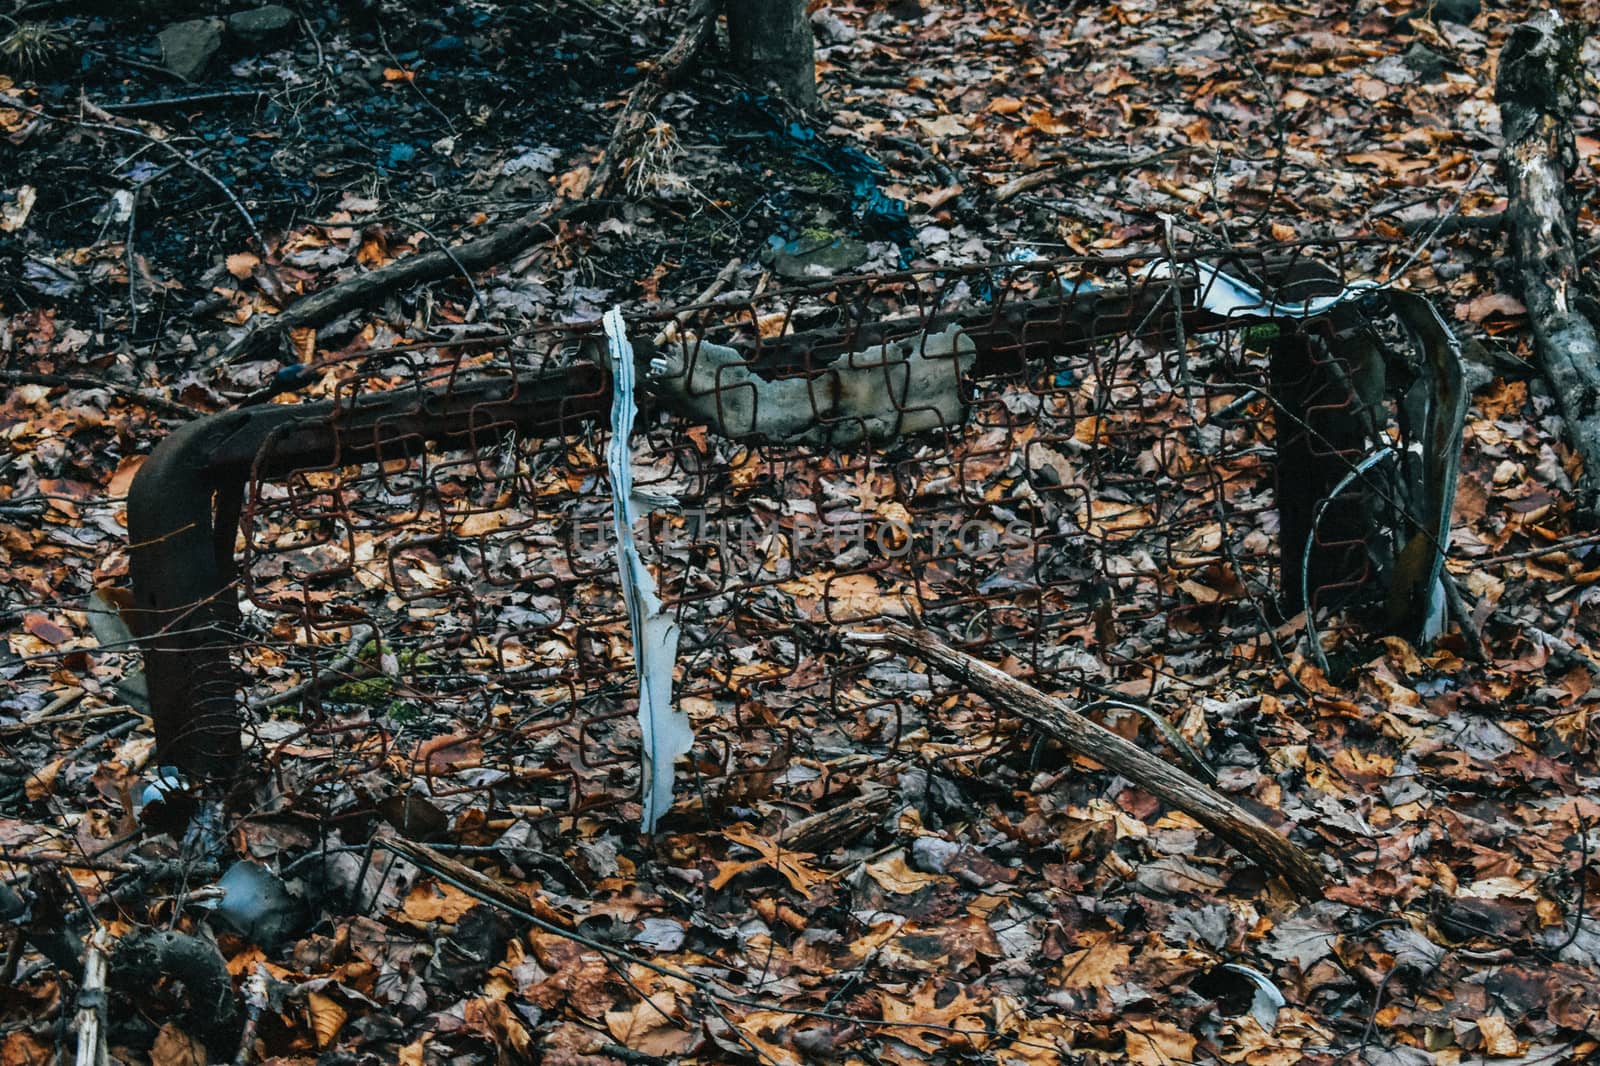 A Rusty and Broken Bed Frame Left in the Autumn Forest